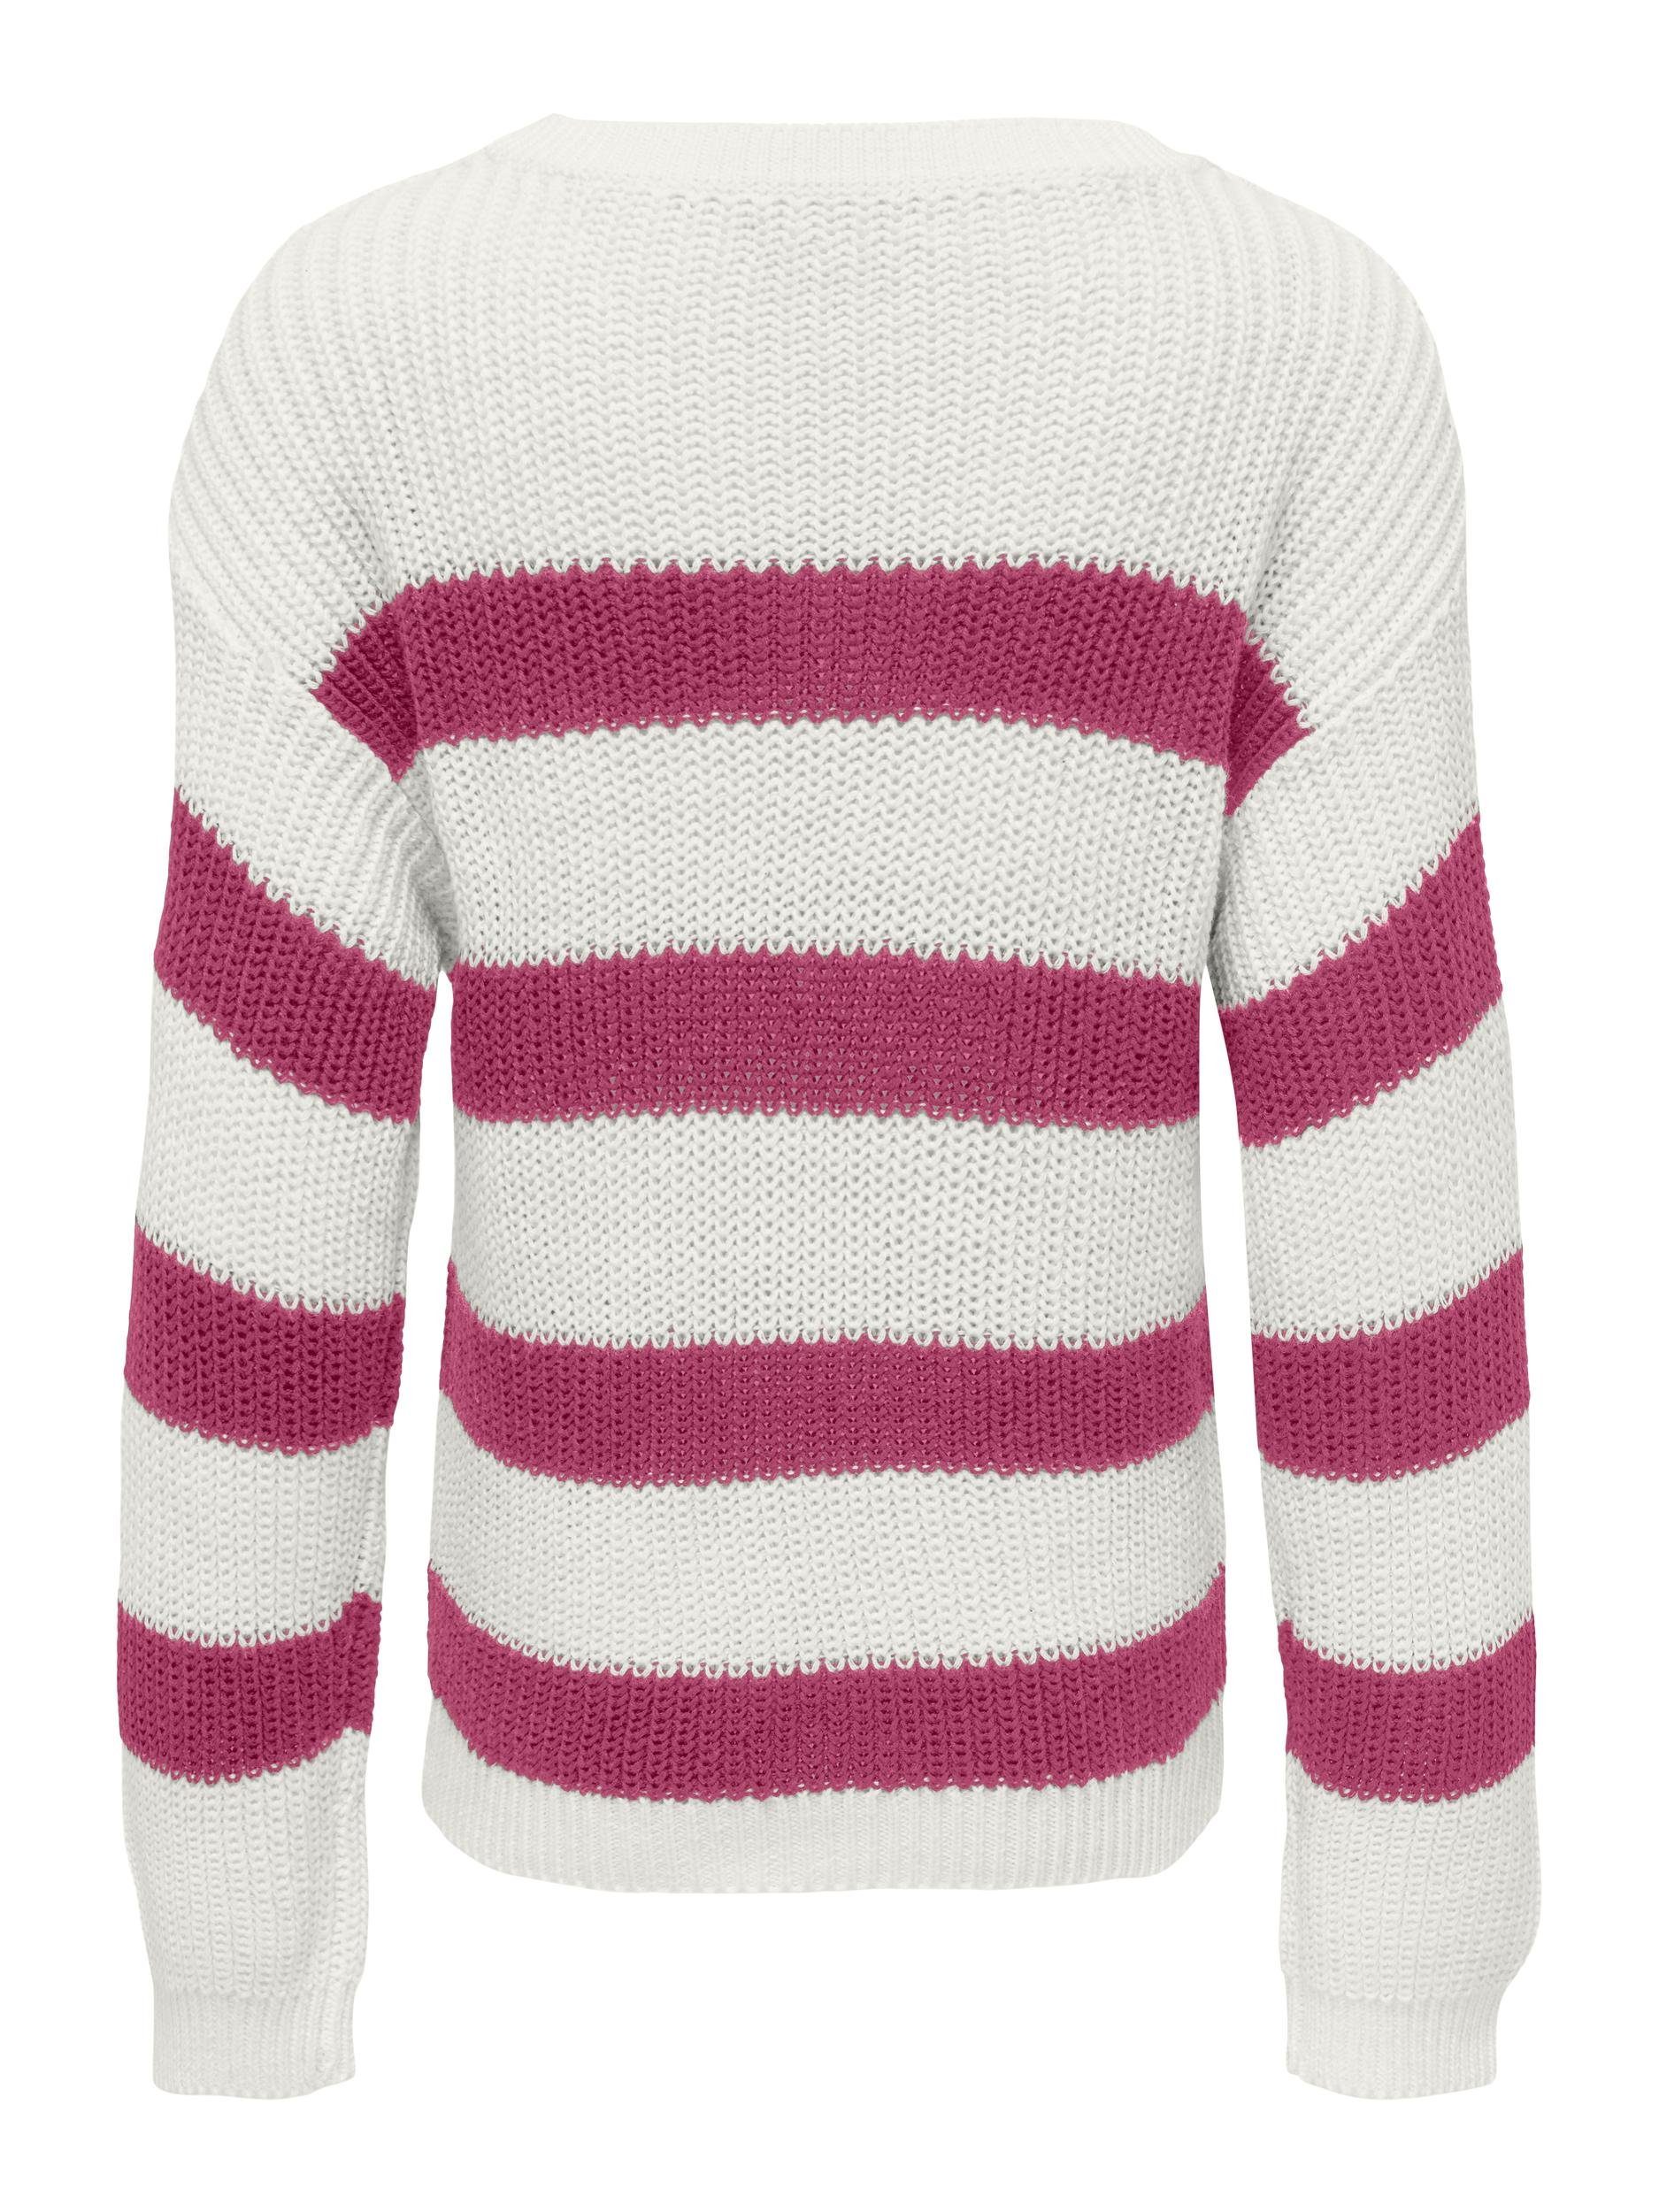 PULLOVER Strickpullover STRIPED ONLY KNT KIDS KOGSIF LS